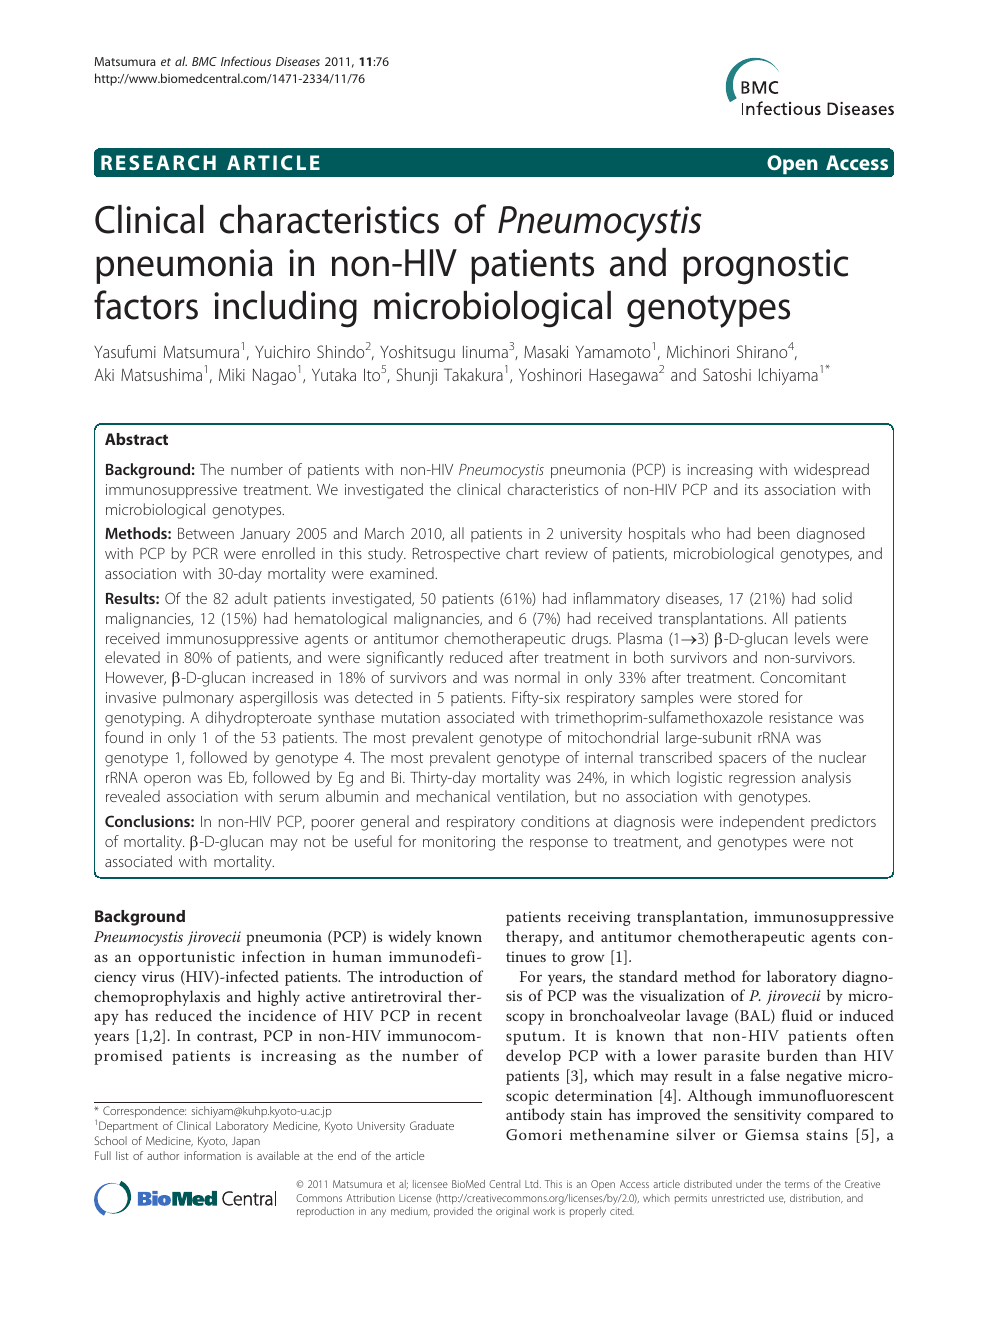 Clinical Characteristics Of Pneumocystis Pneumonia In Non Hiv Patients And Prognostic Factors Including Microbiological Genotypes Topic Of Research Paper In Health Sciences Download Scholarly Article Pdf And Read For Free On Cyberleninka